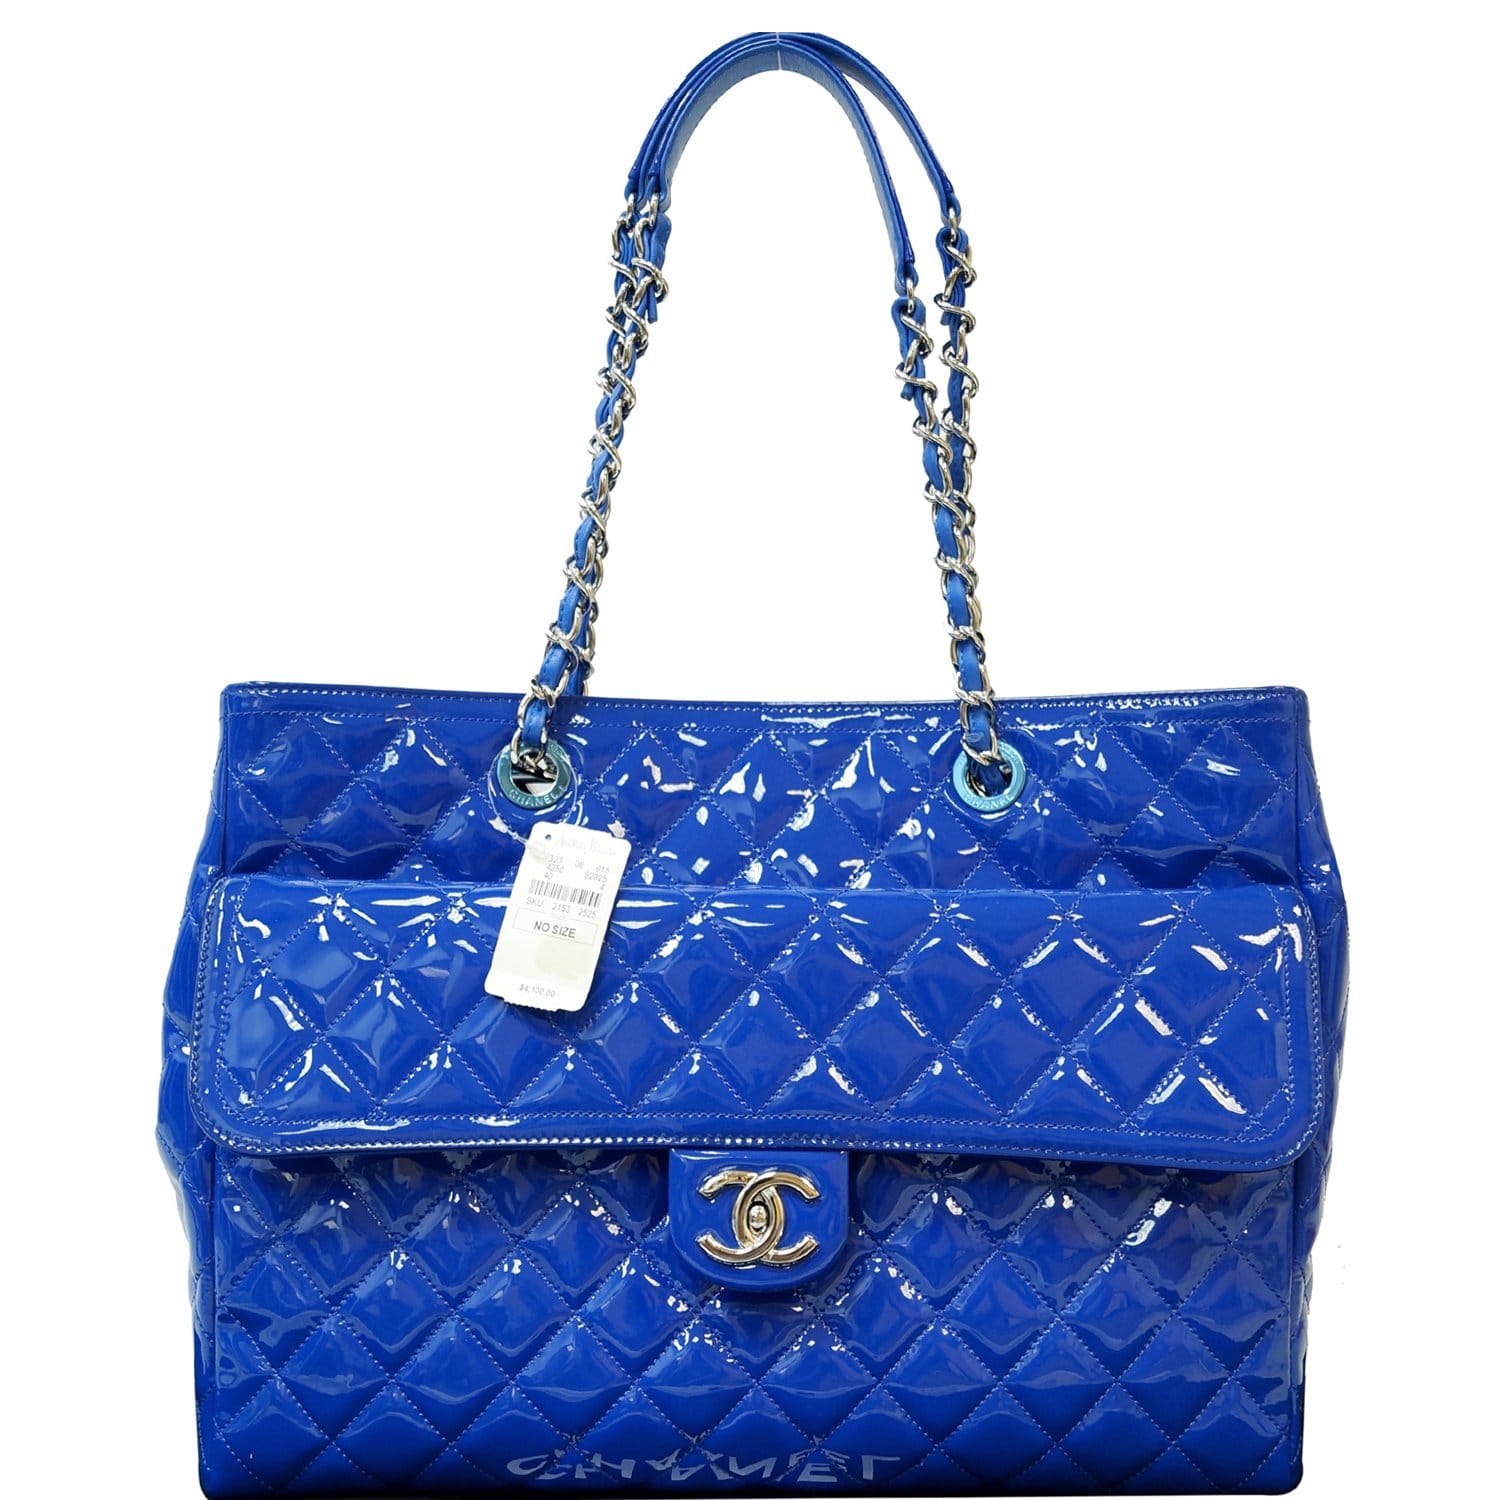 Chanel - Authenticated Coco Curve Handbag - Leather Blue Plain for Women, Very Good Condition